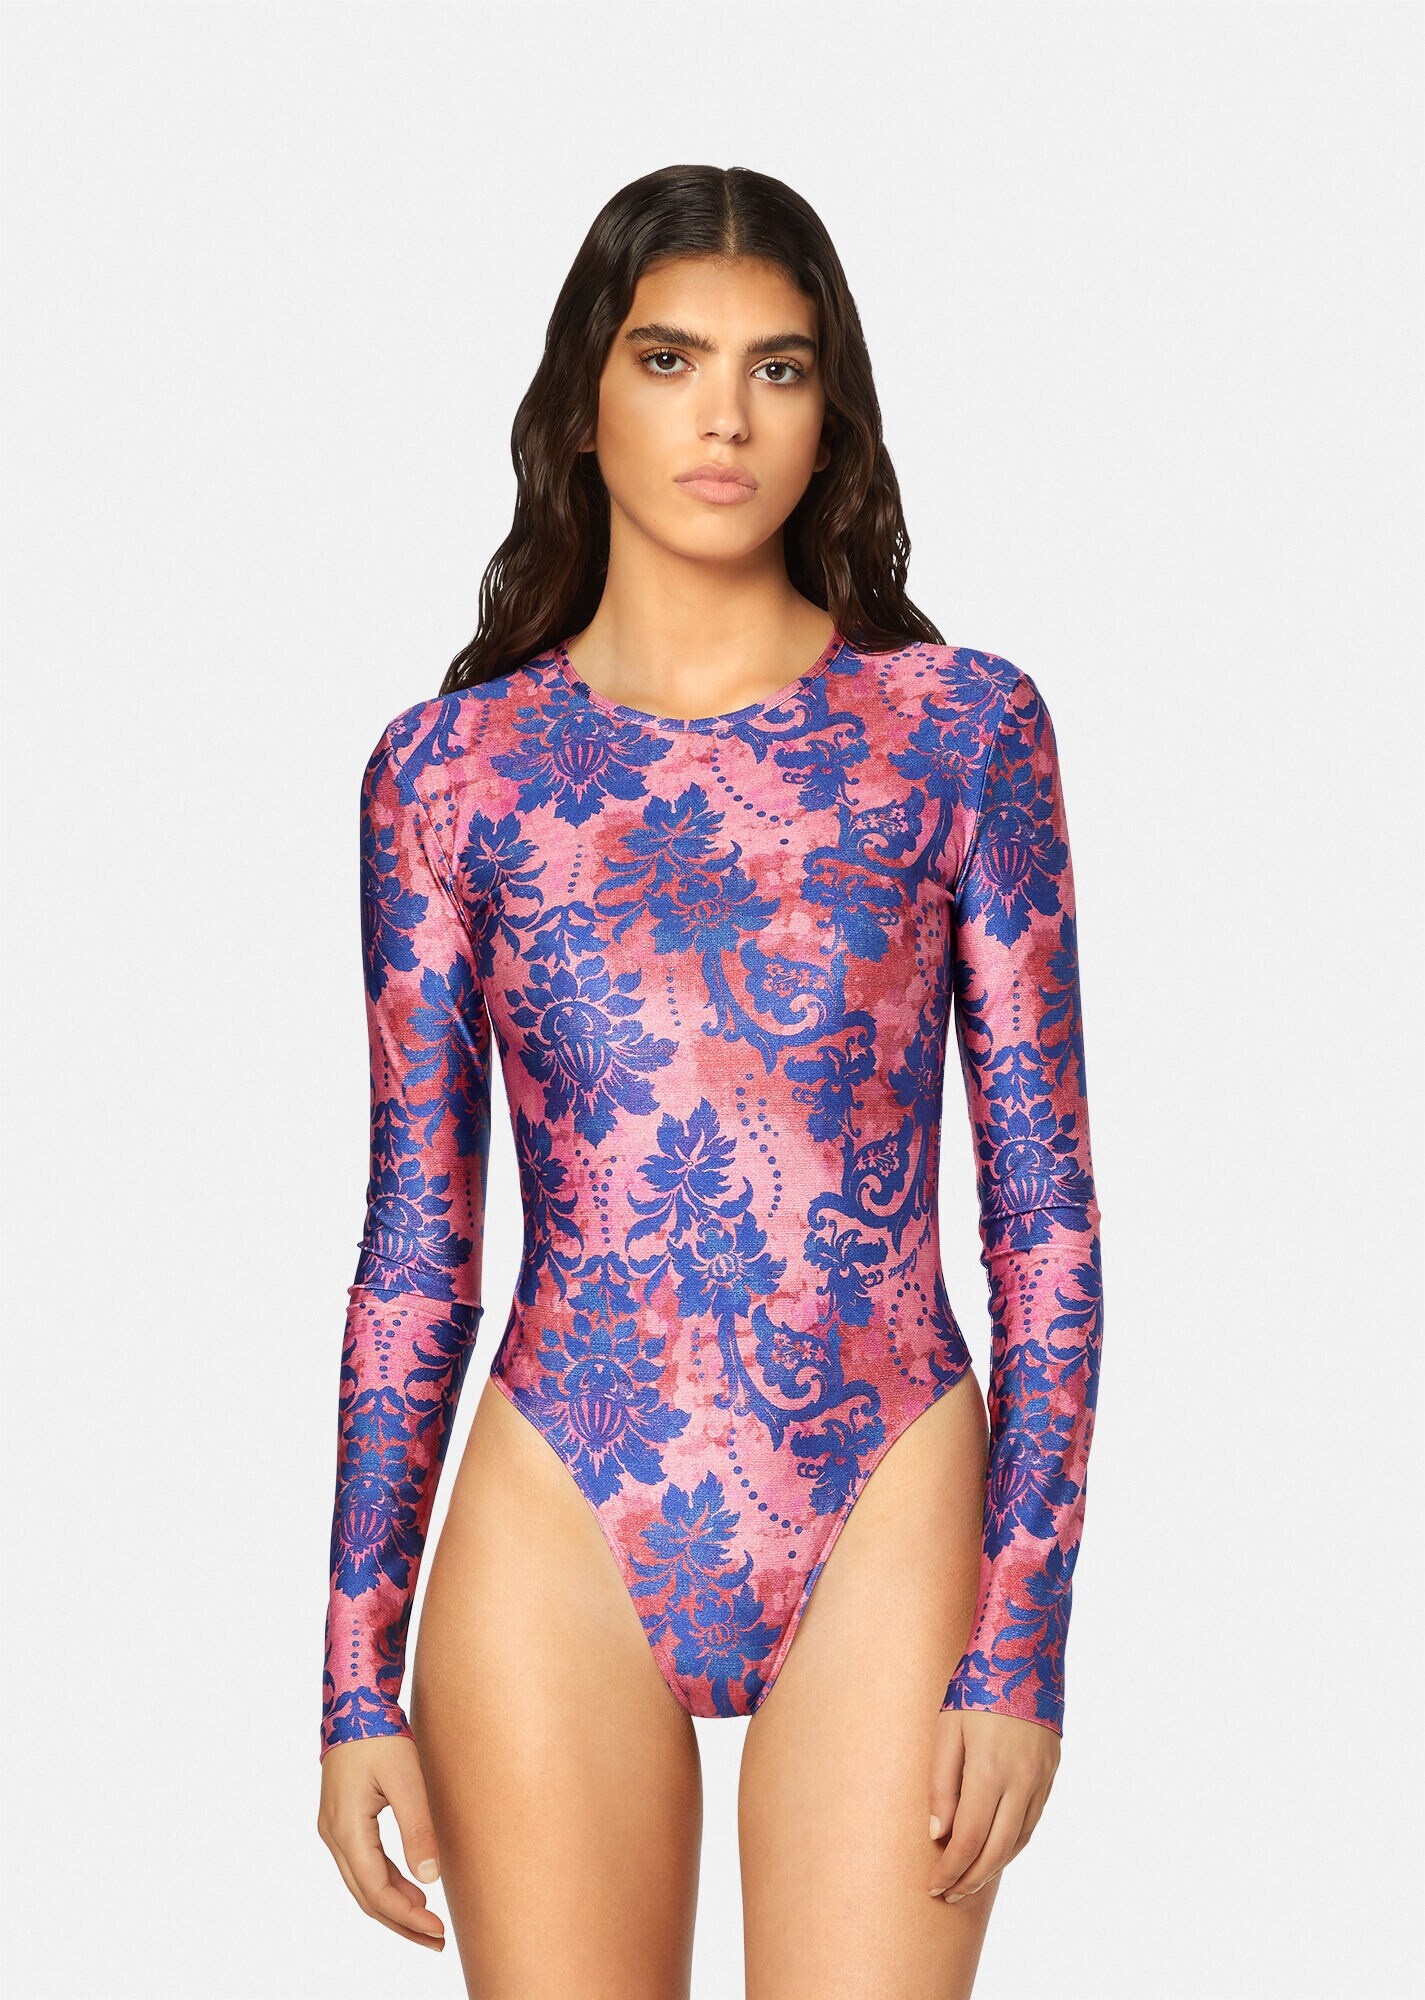 Tapestry Couture Bodysuit - 3